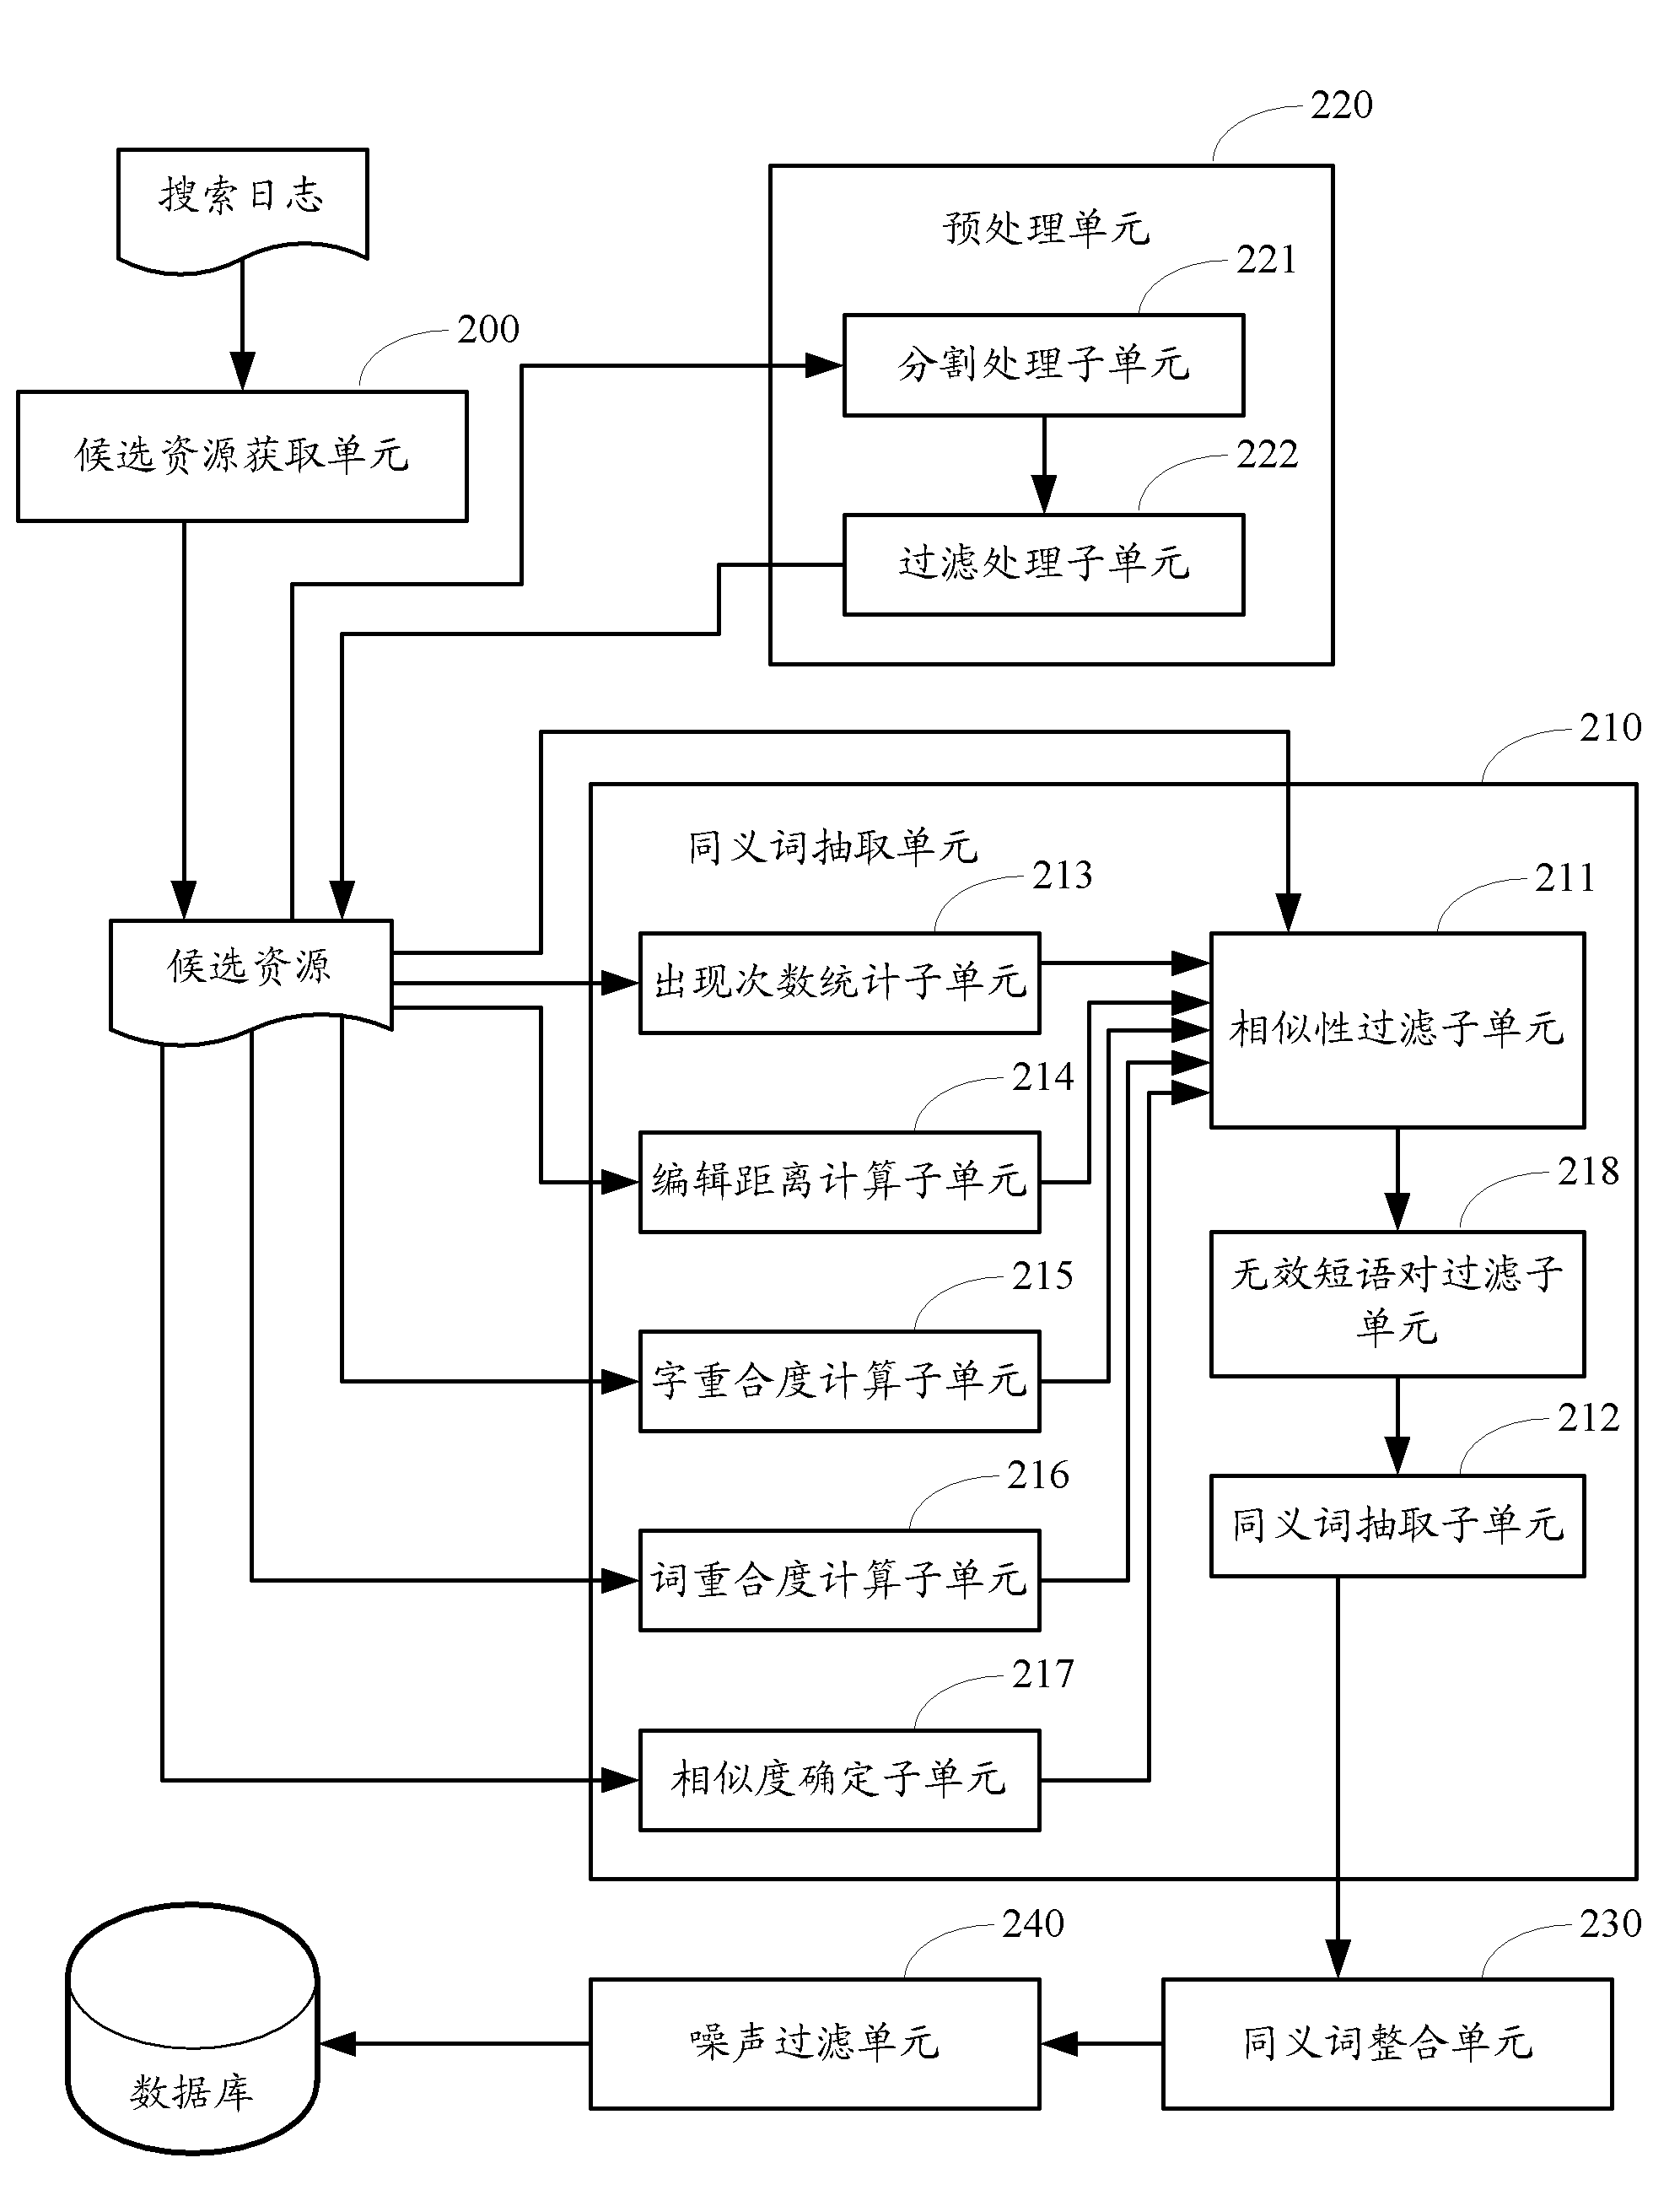 Method and device for mining synonyms